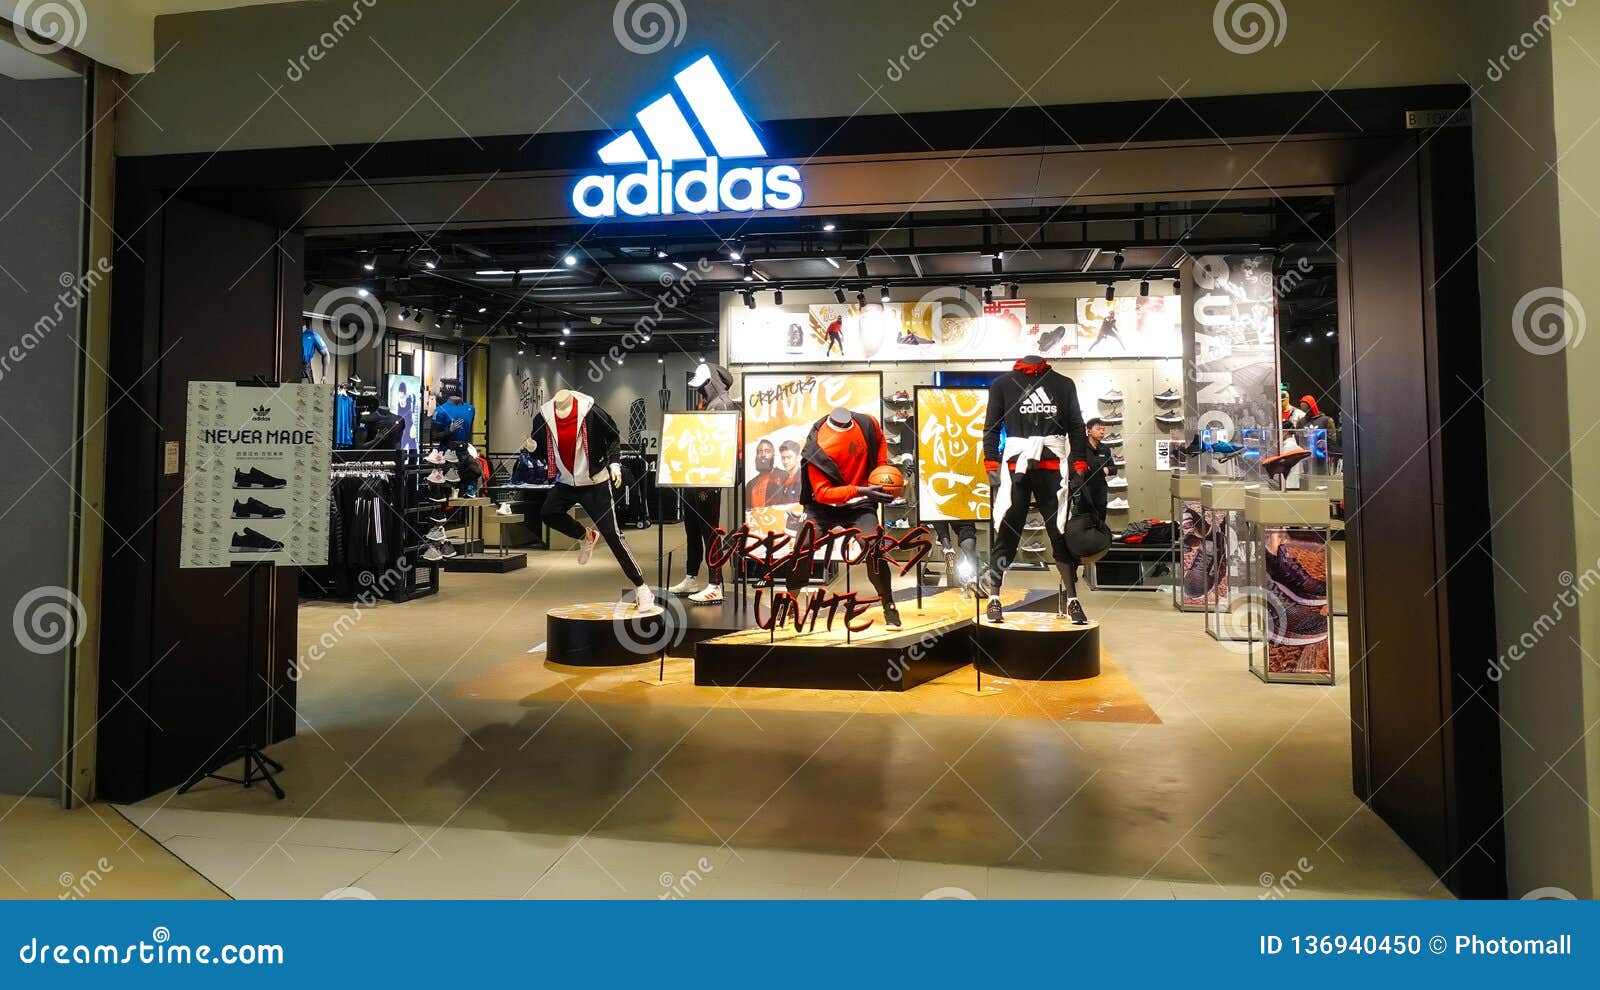 Adidas Sports Store Front Editorial Image - Image of jacket, athletic: 136940450